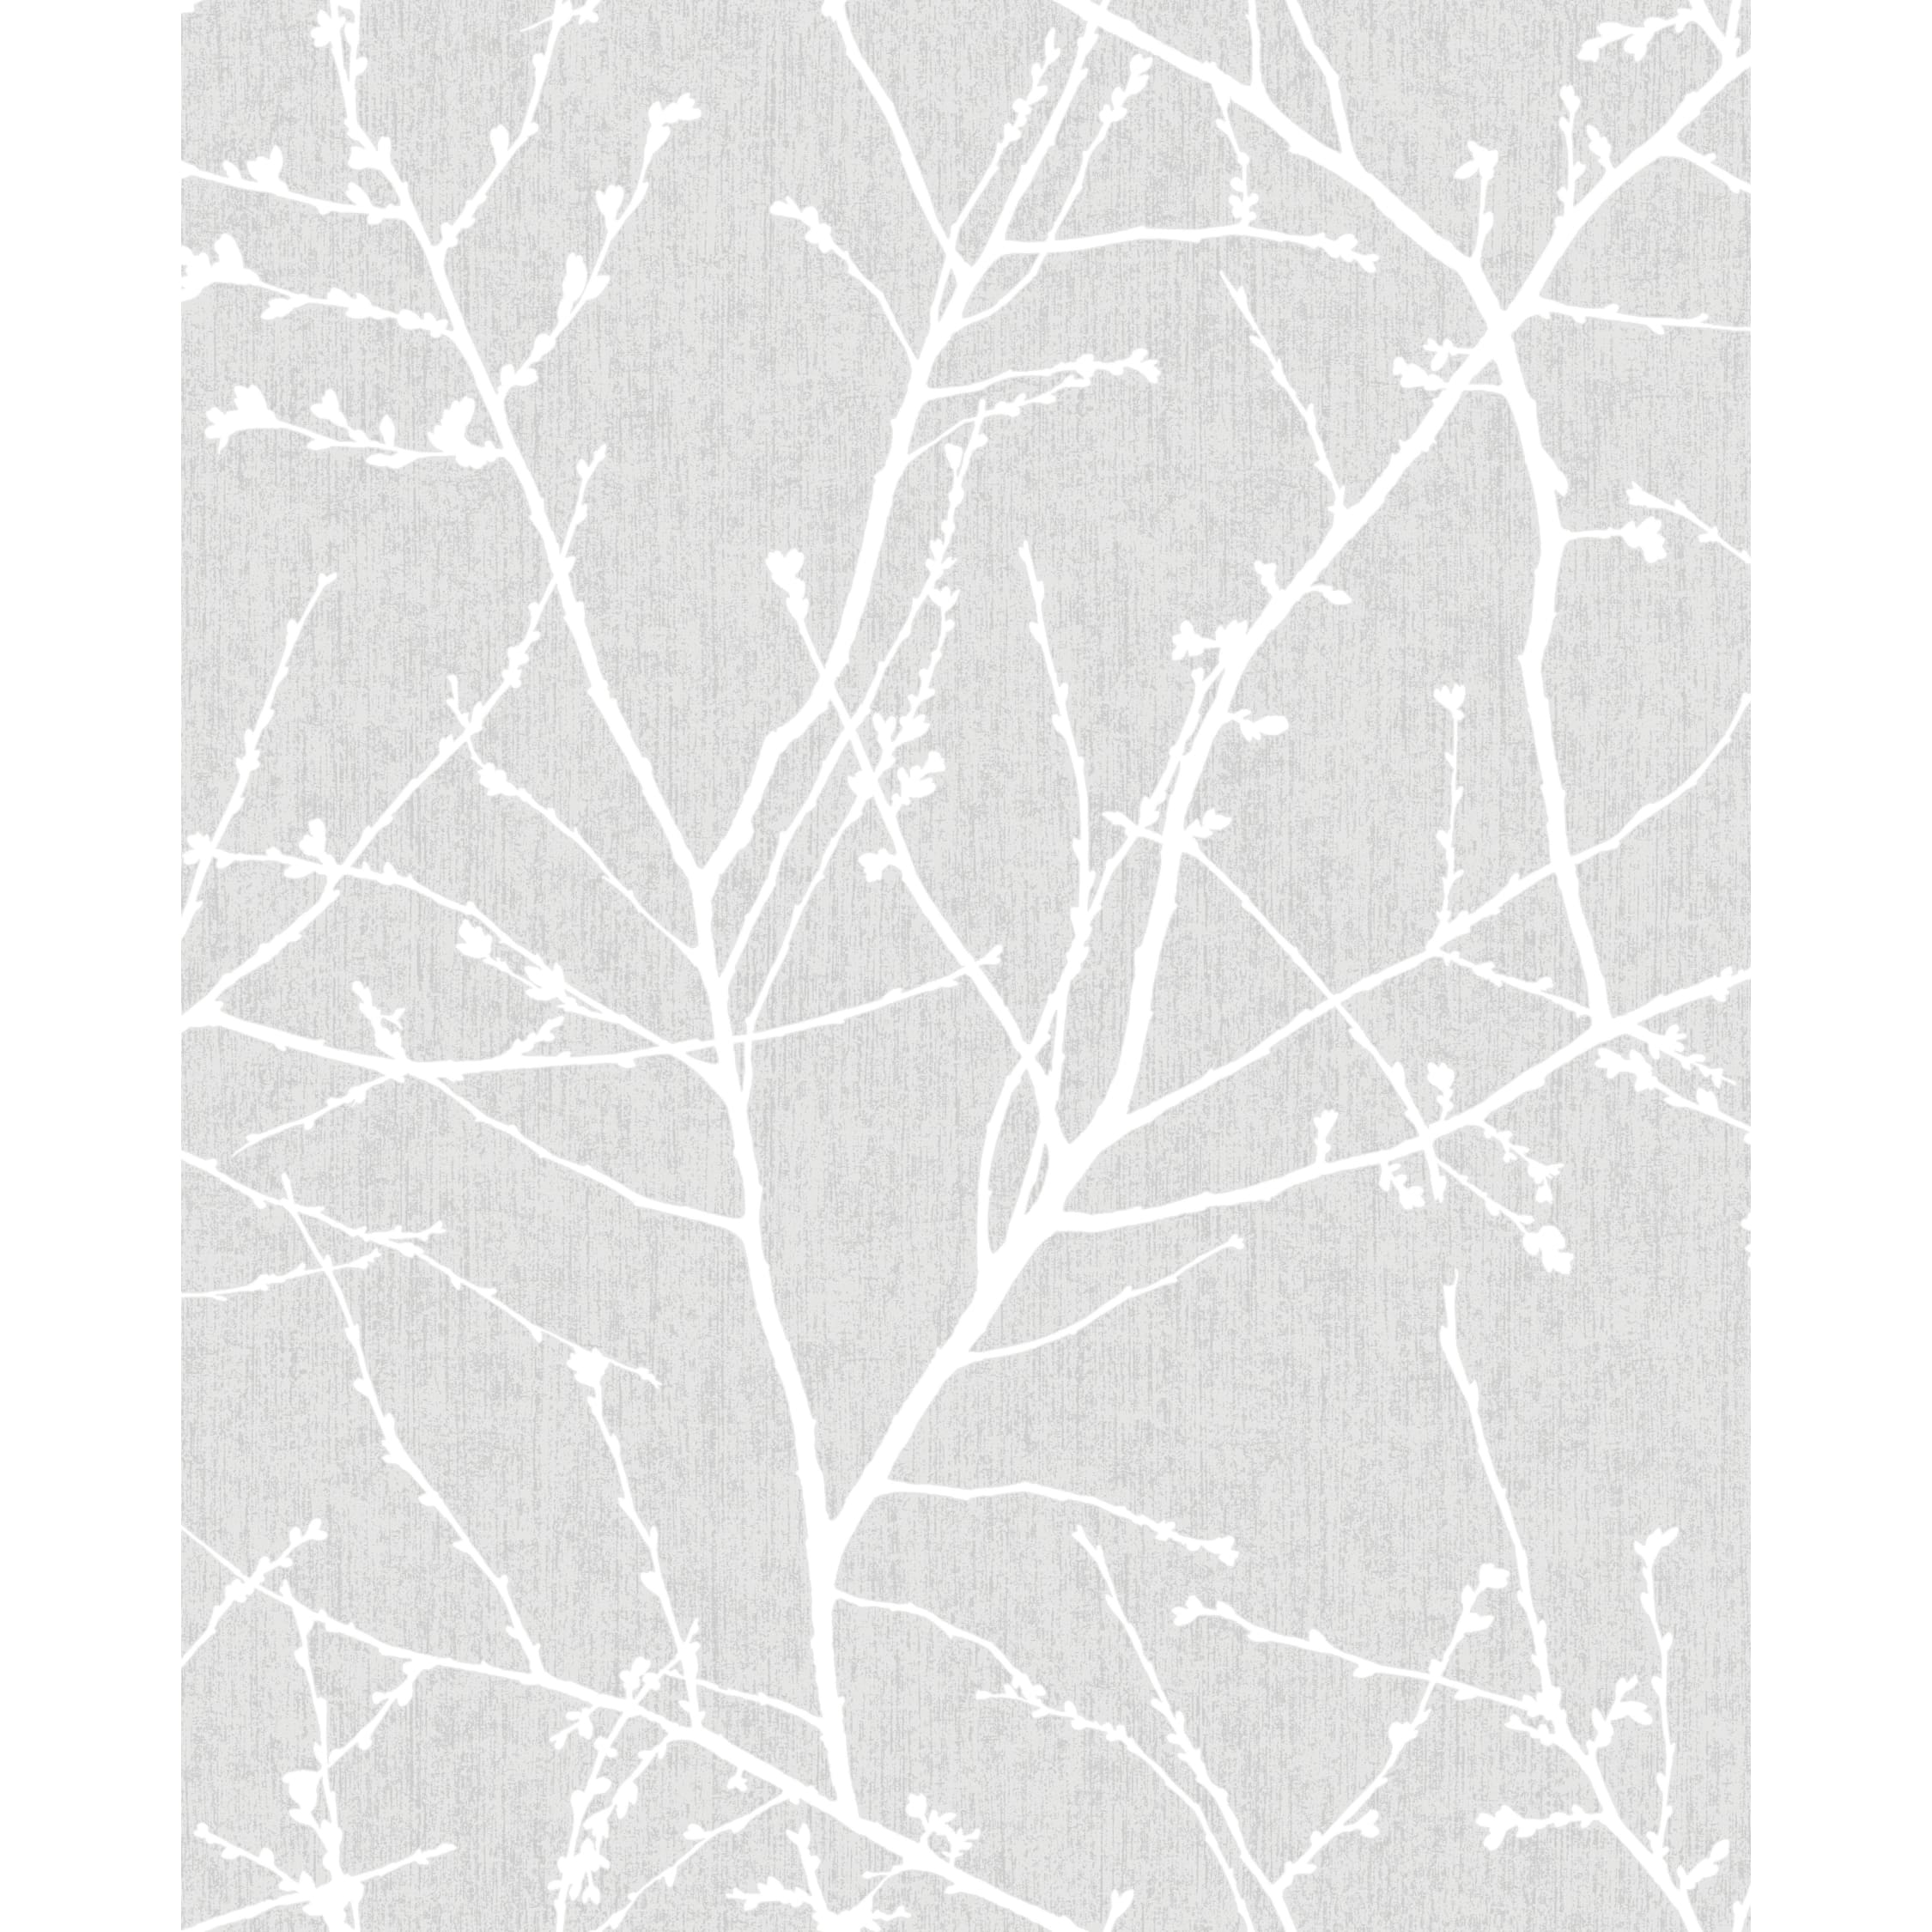 Superfres easy innocence grey fabric effect wallpaper